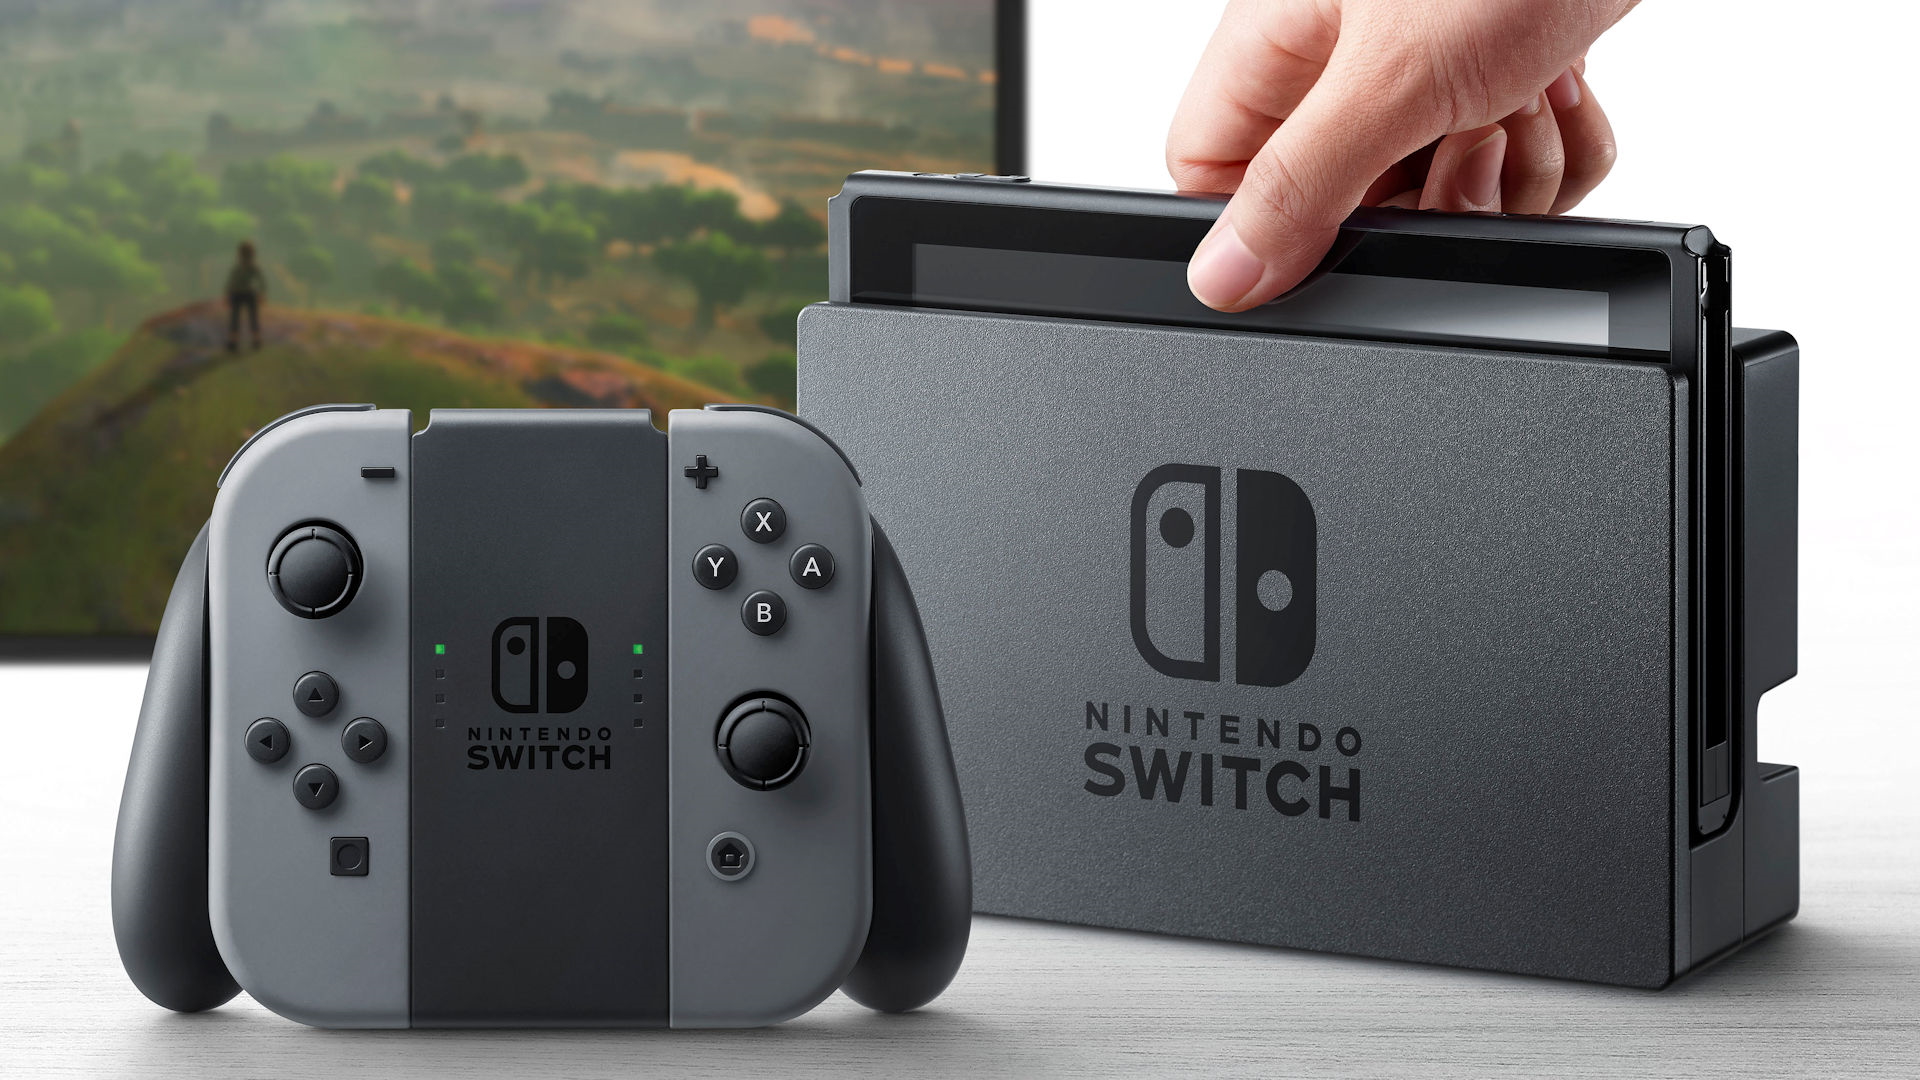 You can now buy an Nintendo Switch for just US$39.99 - NotebookCheck.net News